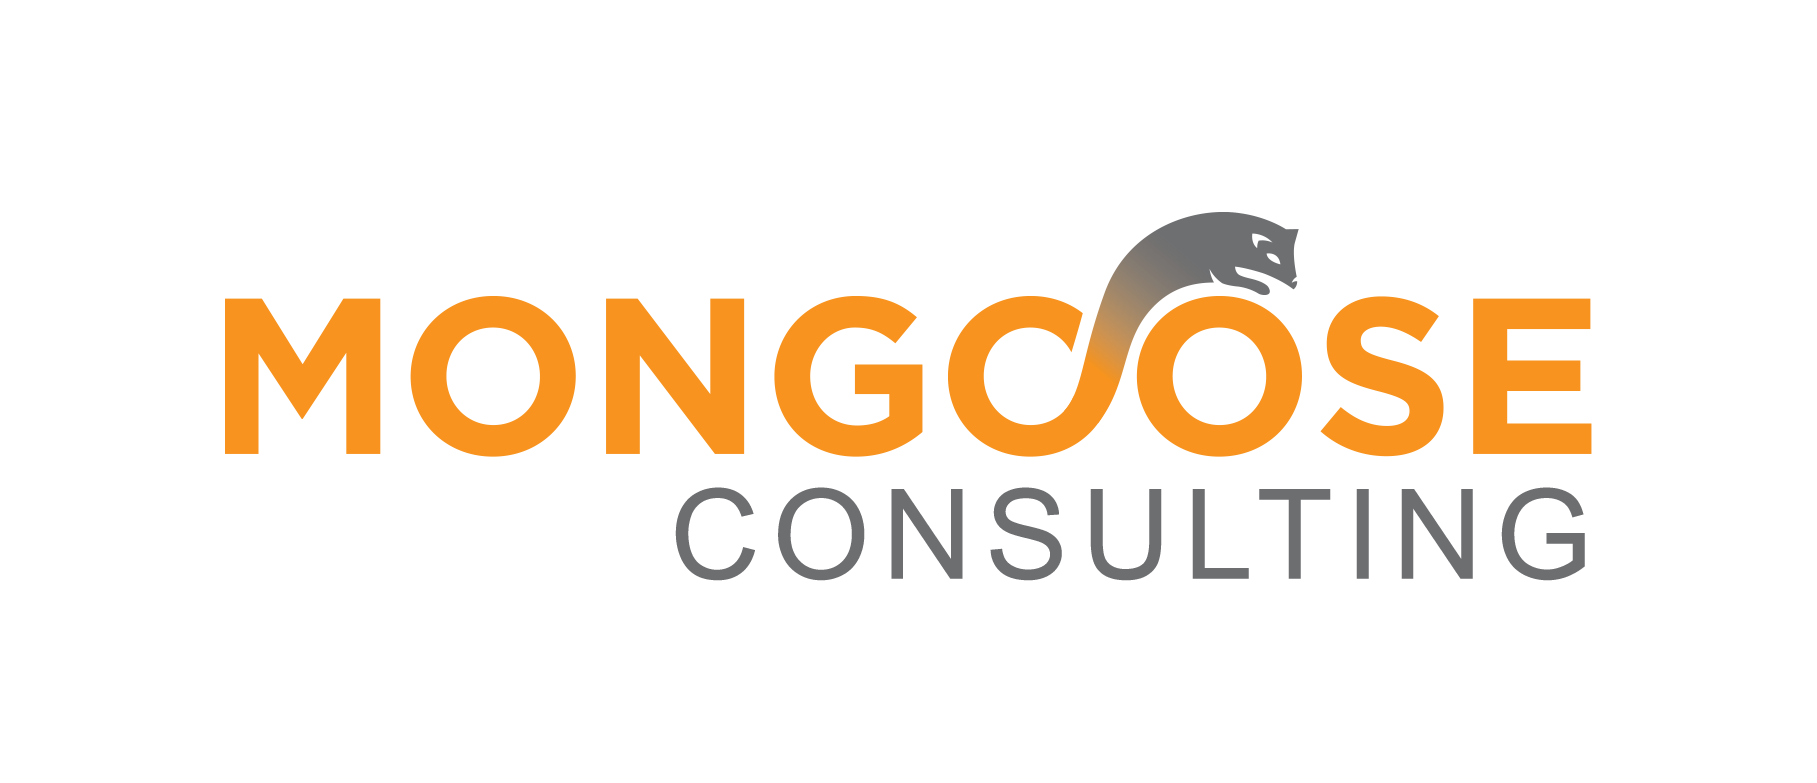 Mongoose Consulting